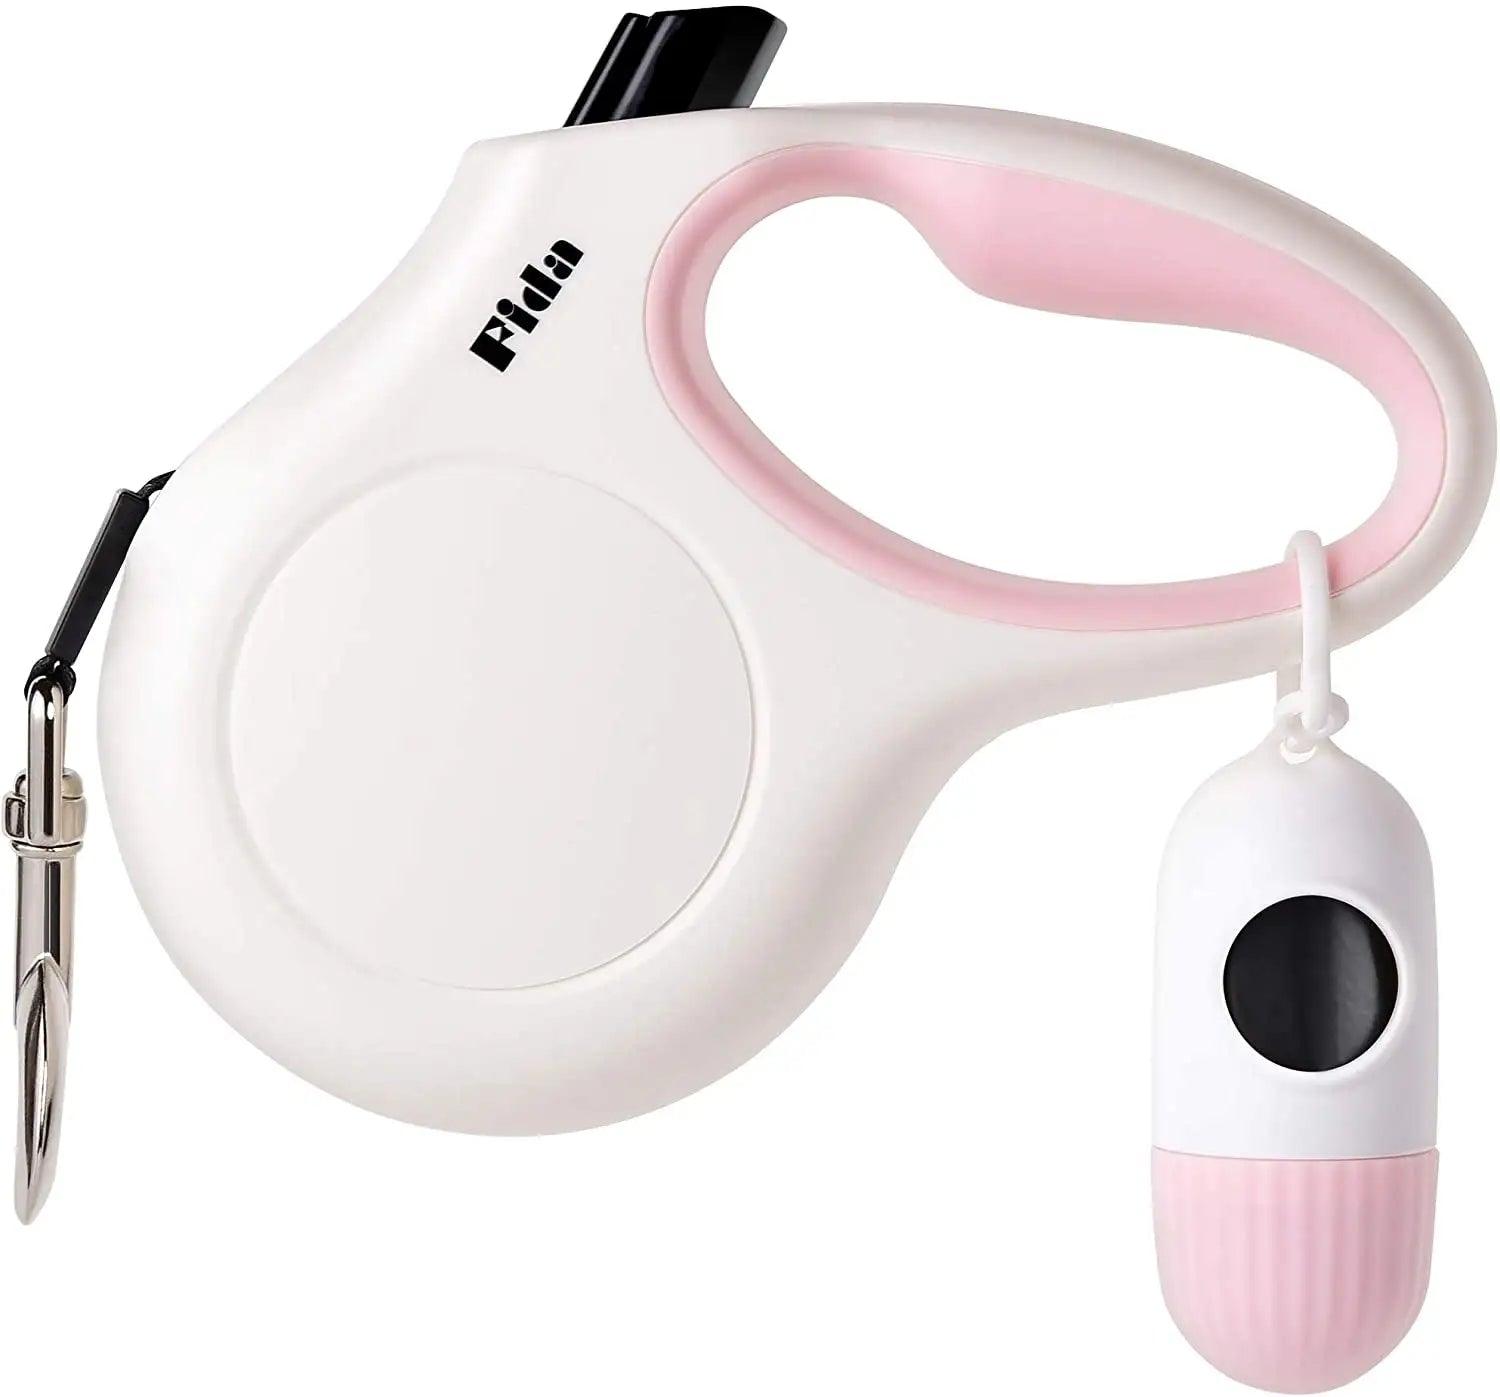 Retractable Dog Leash with Dispenser and Poop Bags - ACO Marketplace